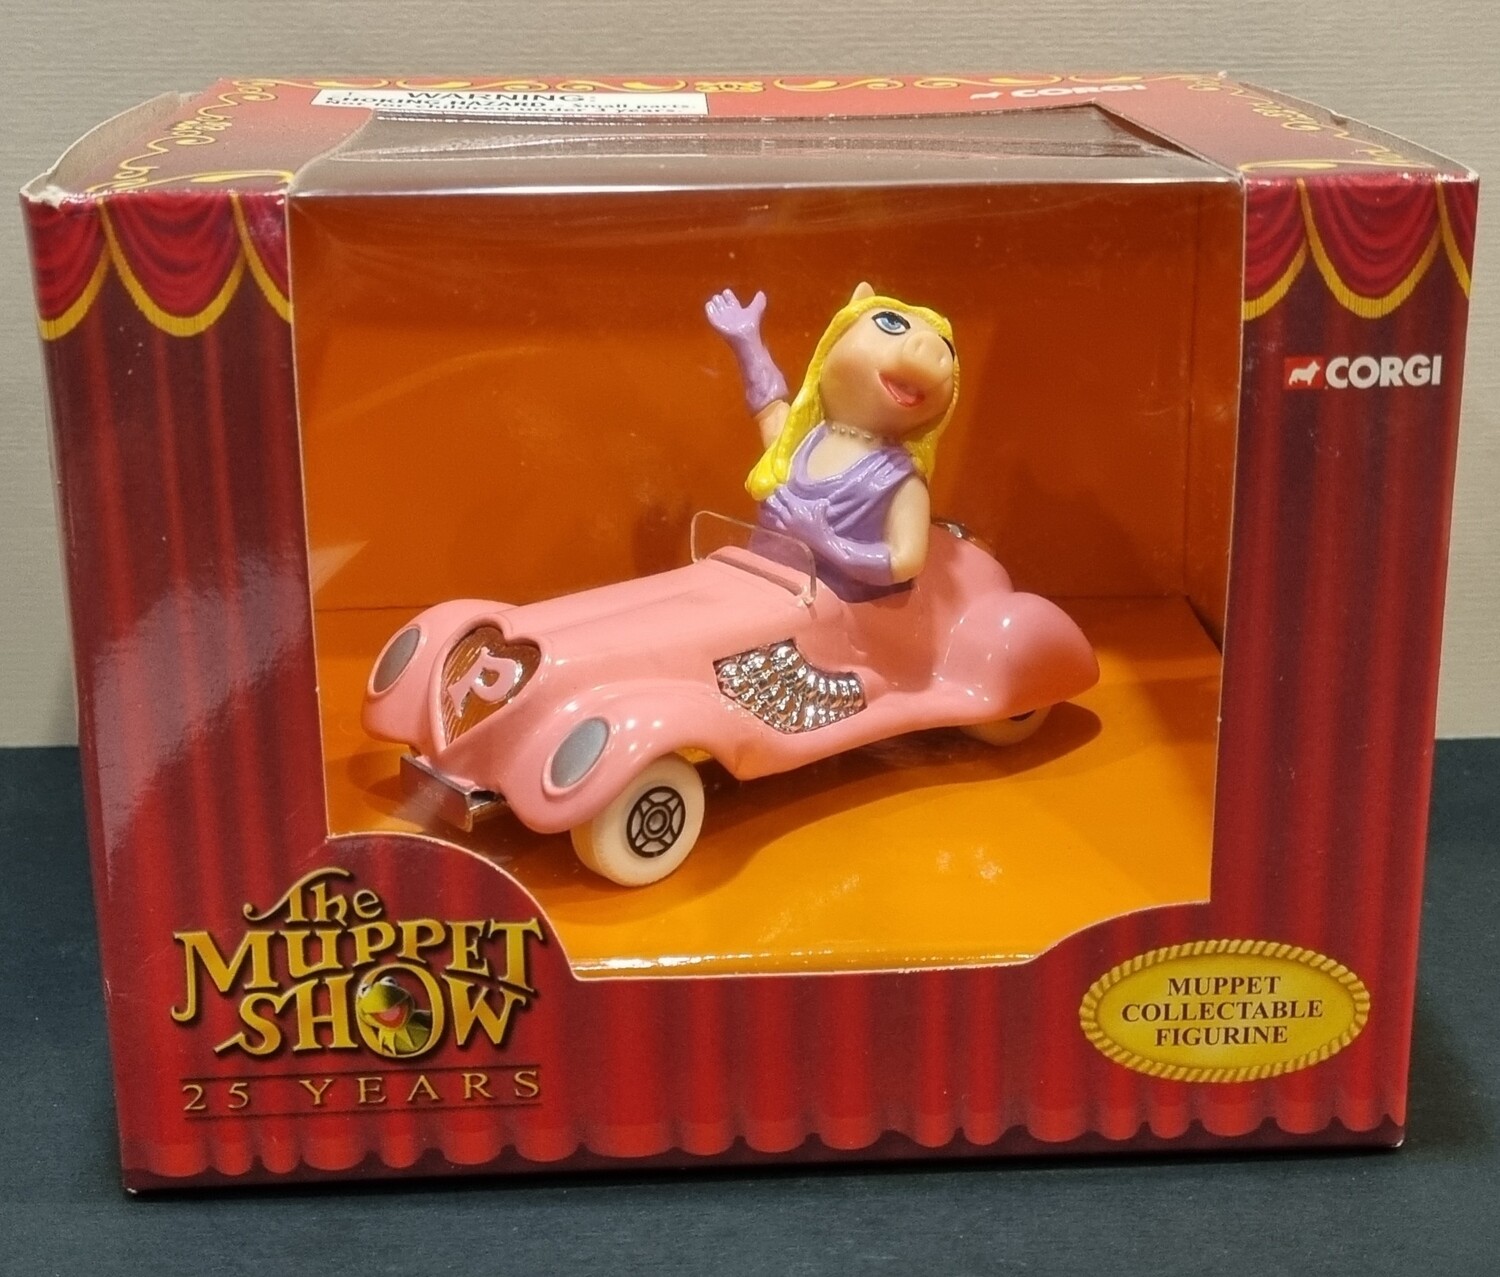 Miss piggy's Car, Corgi, The Muppets, Muppet Collectable Figurine, 25 years